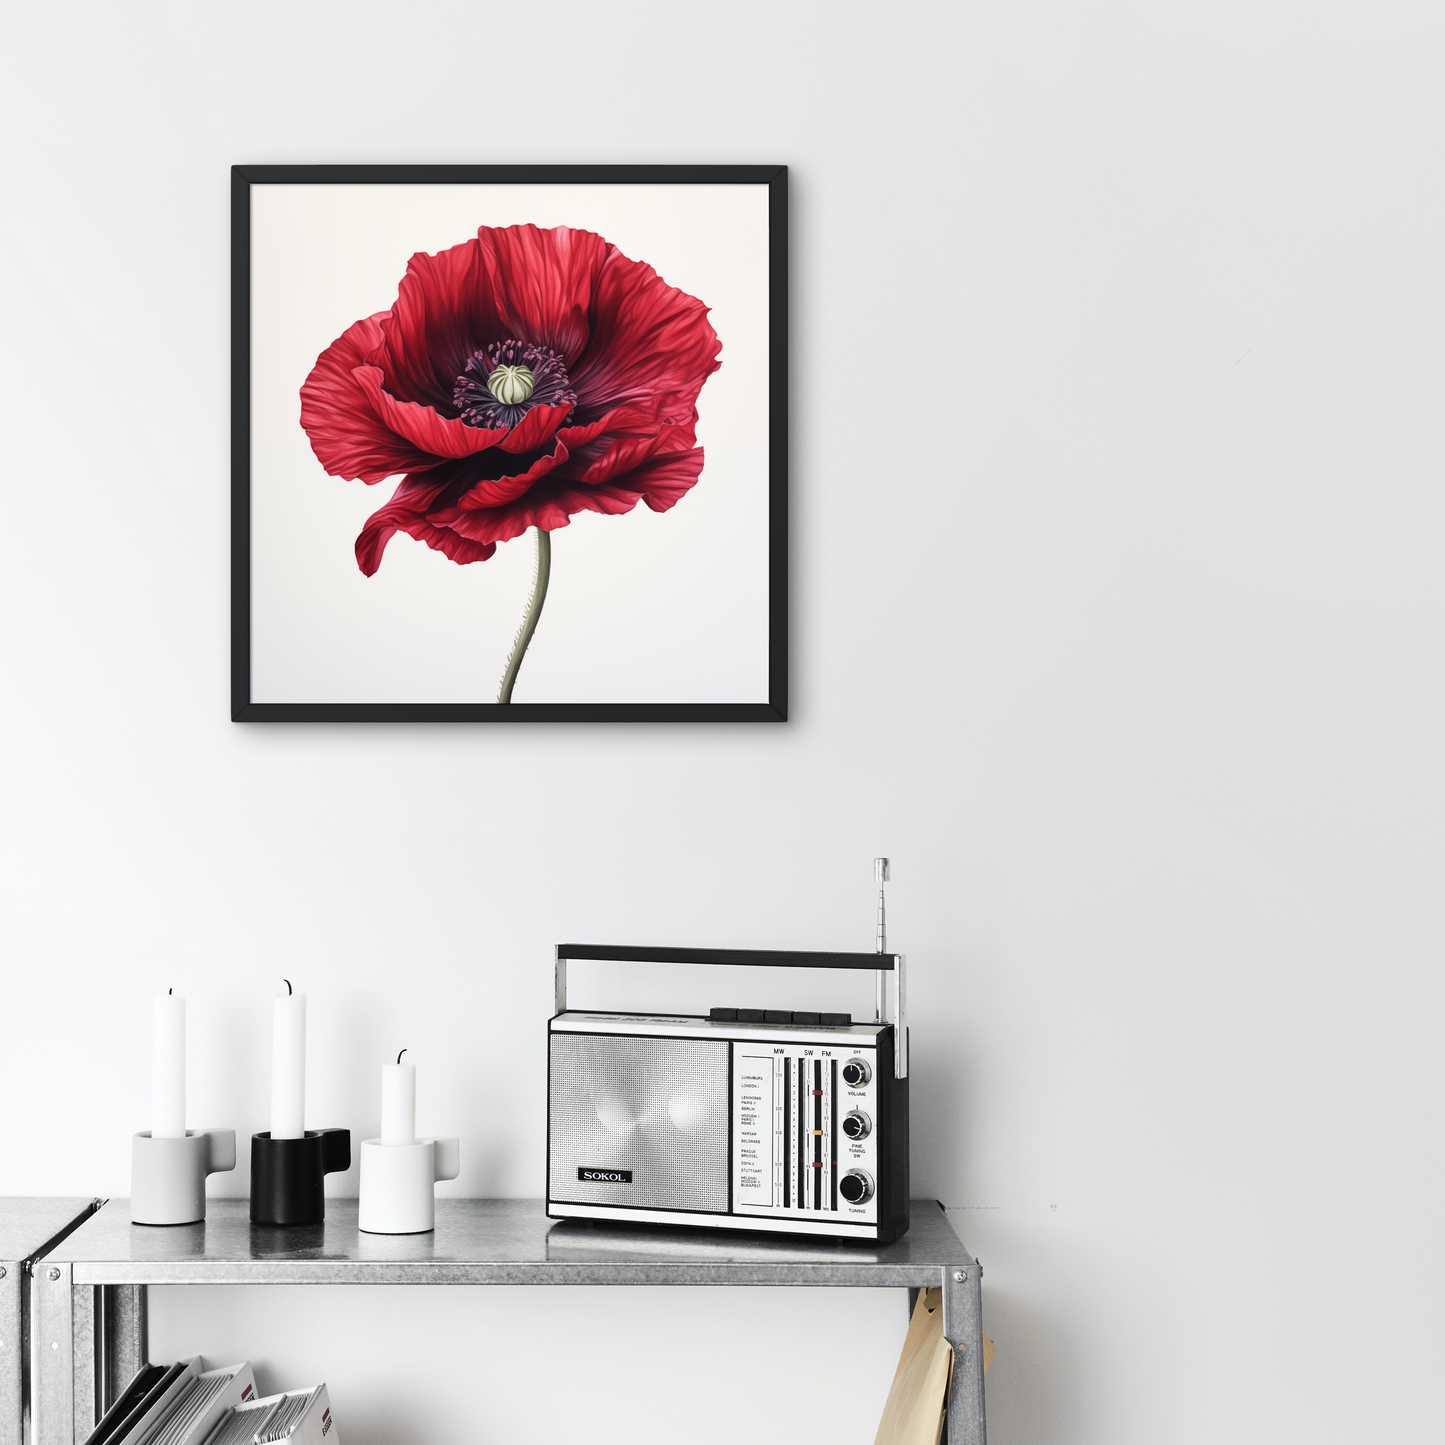 Red Poppy National Flower of Palestine Lest we Forget Remembrance Veterans Wall Print Art, Home Decor Poster